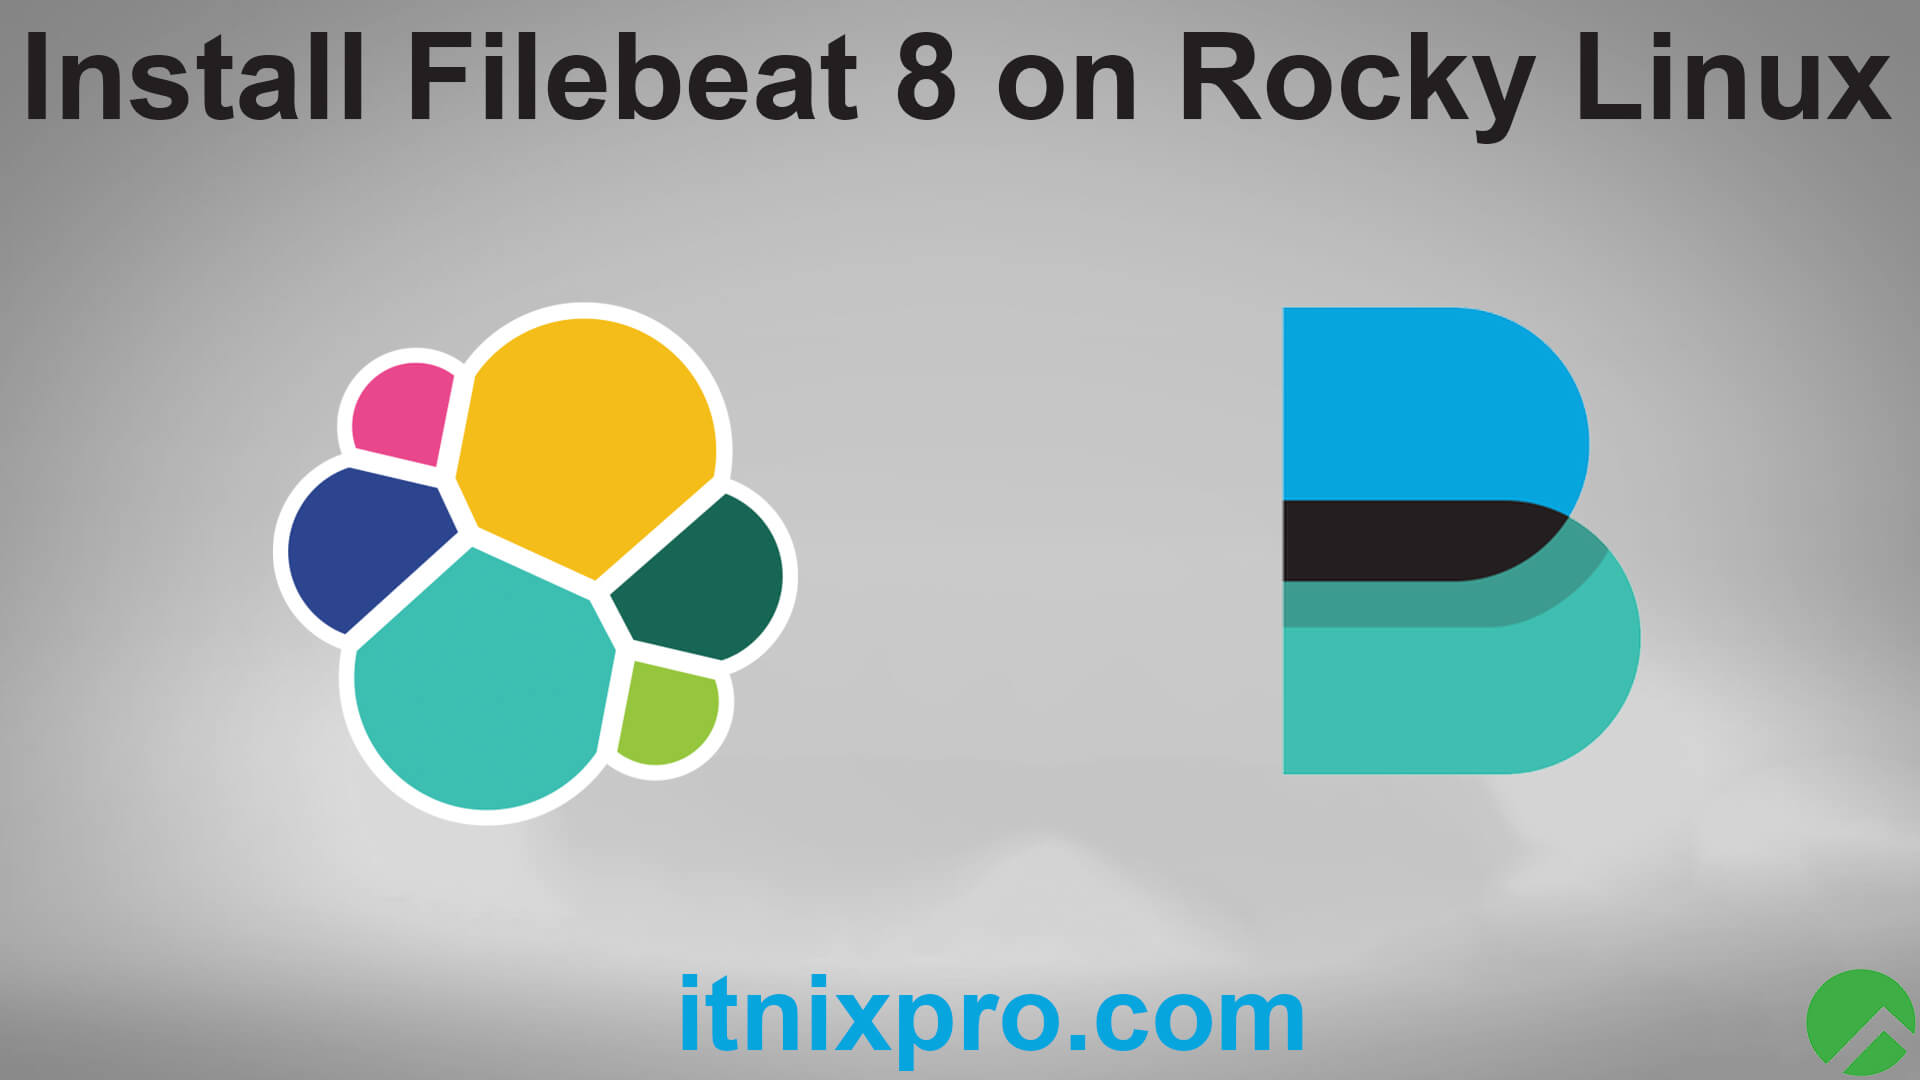 Install Filebeat 8 on Rocky Linux